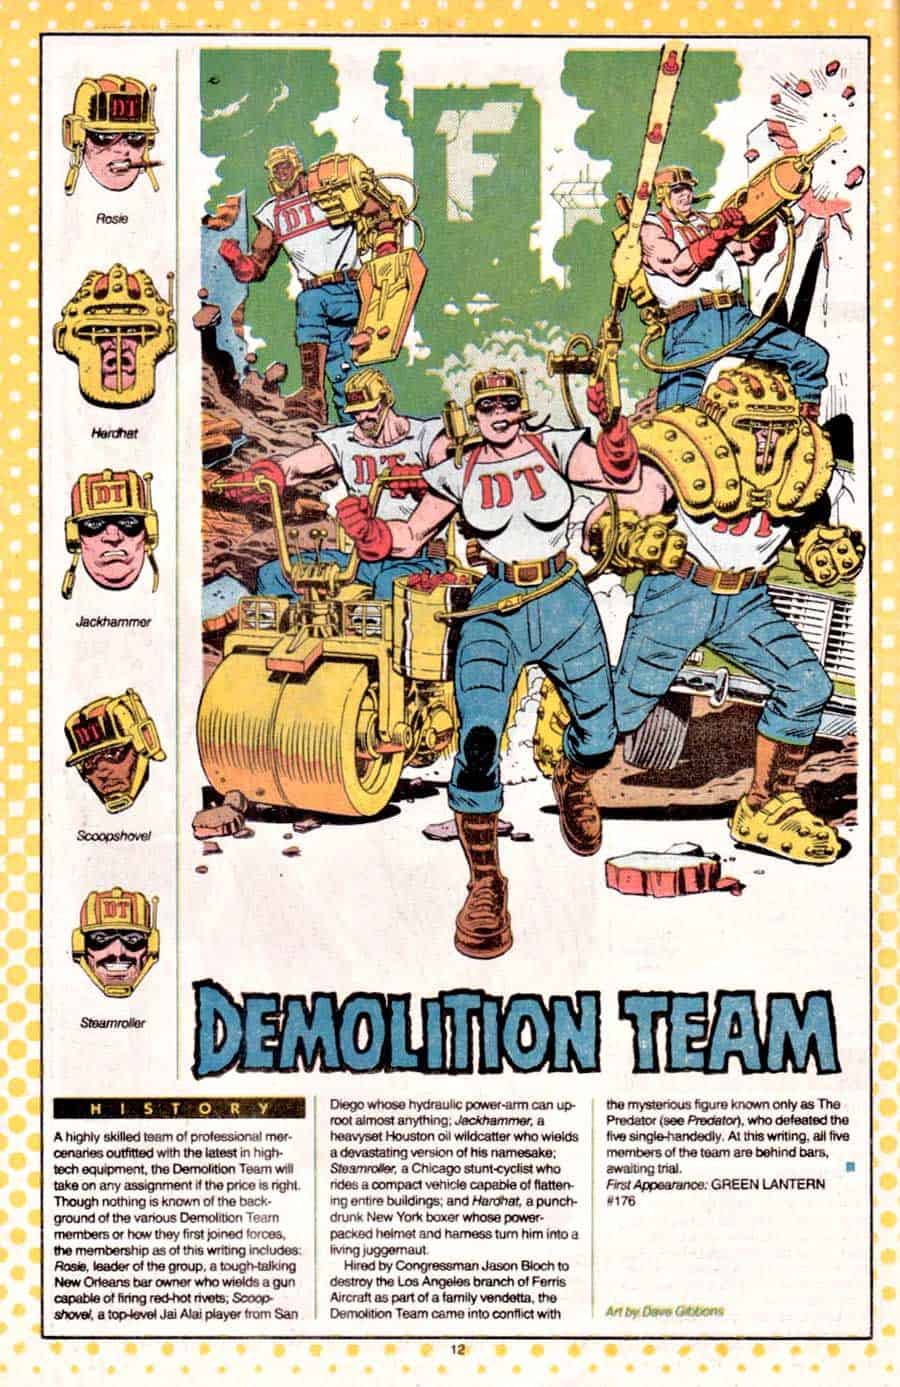 Demolition-Team-Whos-Who-In-The-DC-Comcis-Universe